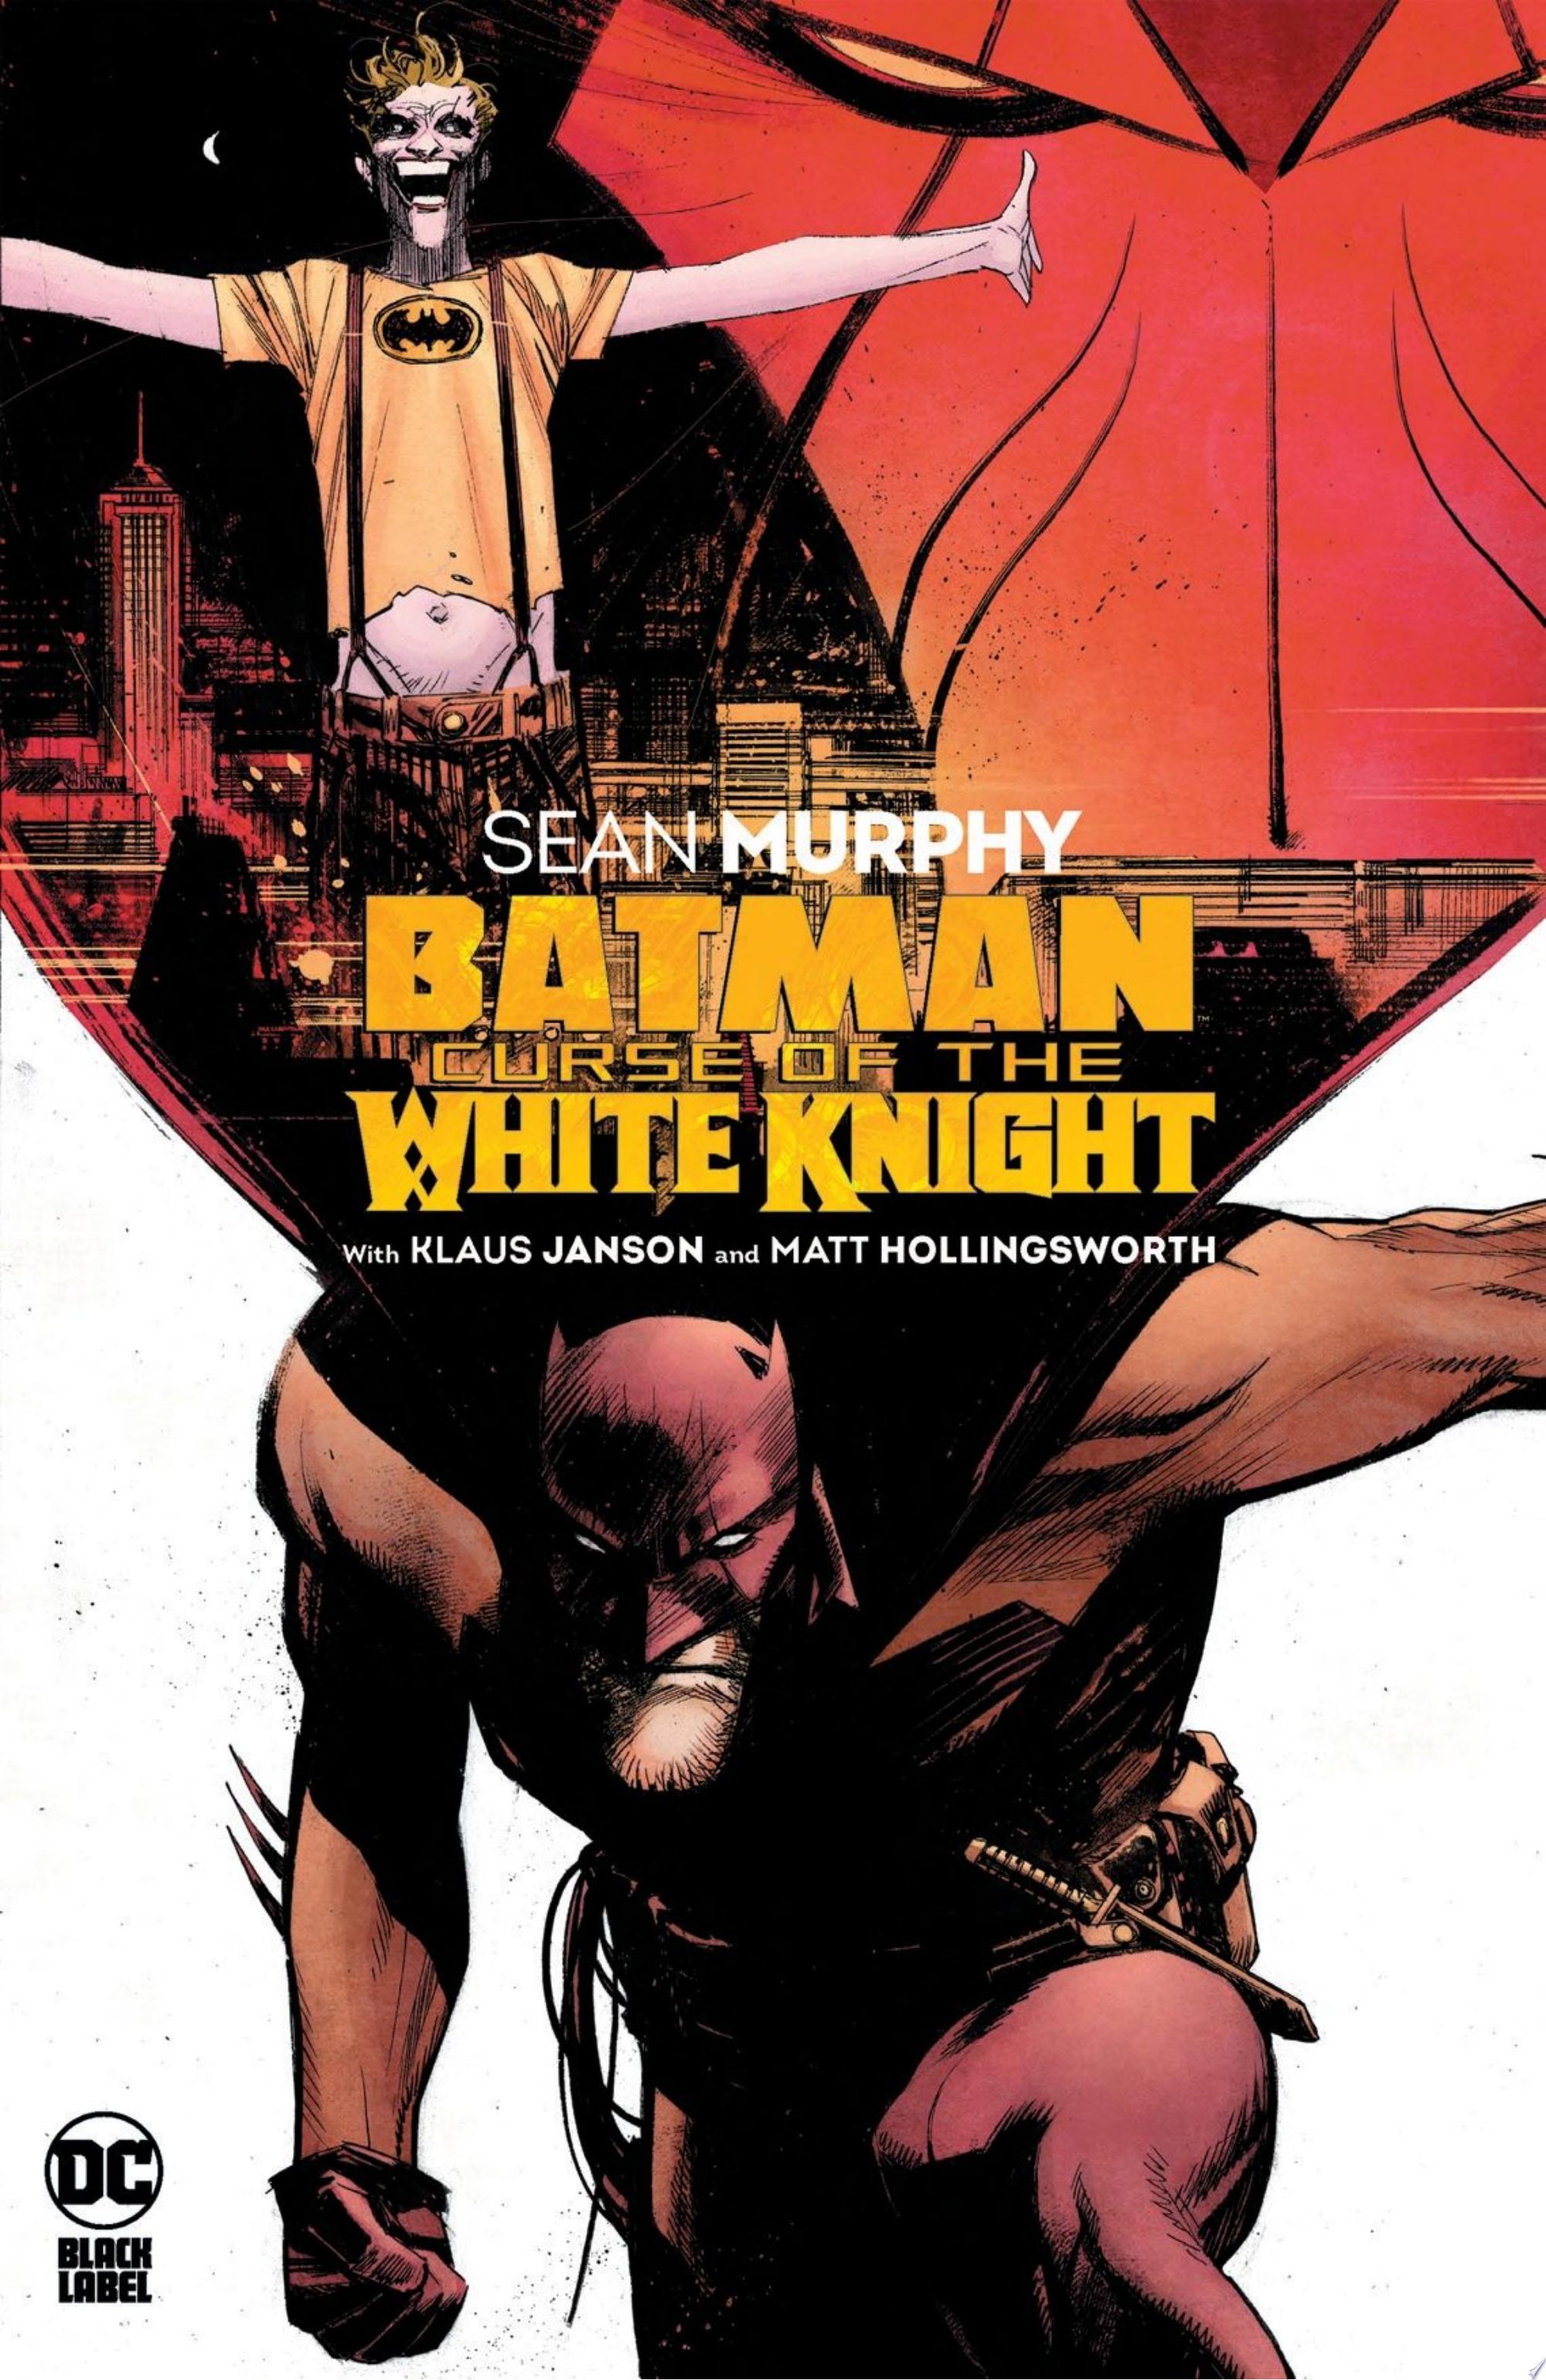 Image for "Batman: Curse of the White Knight"